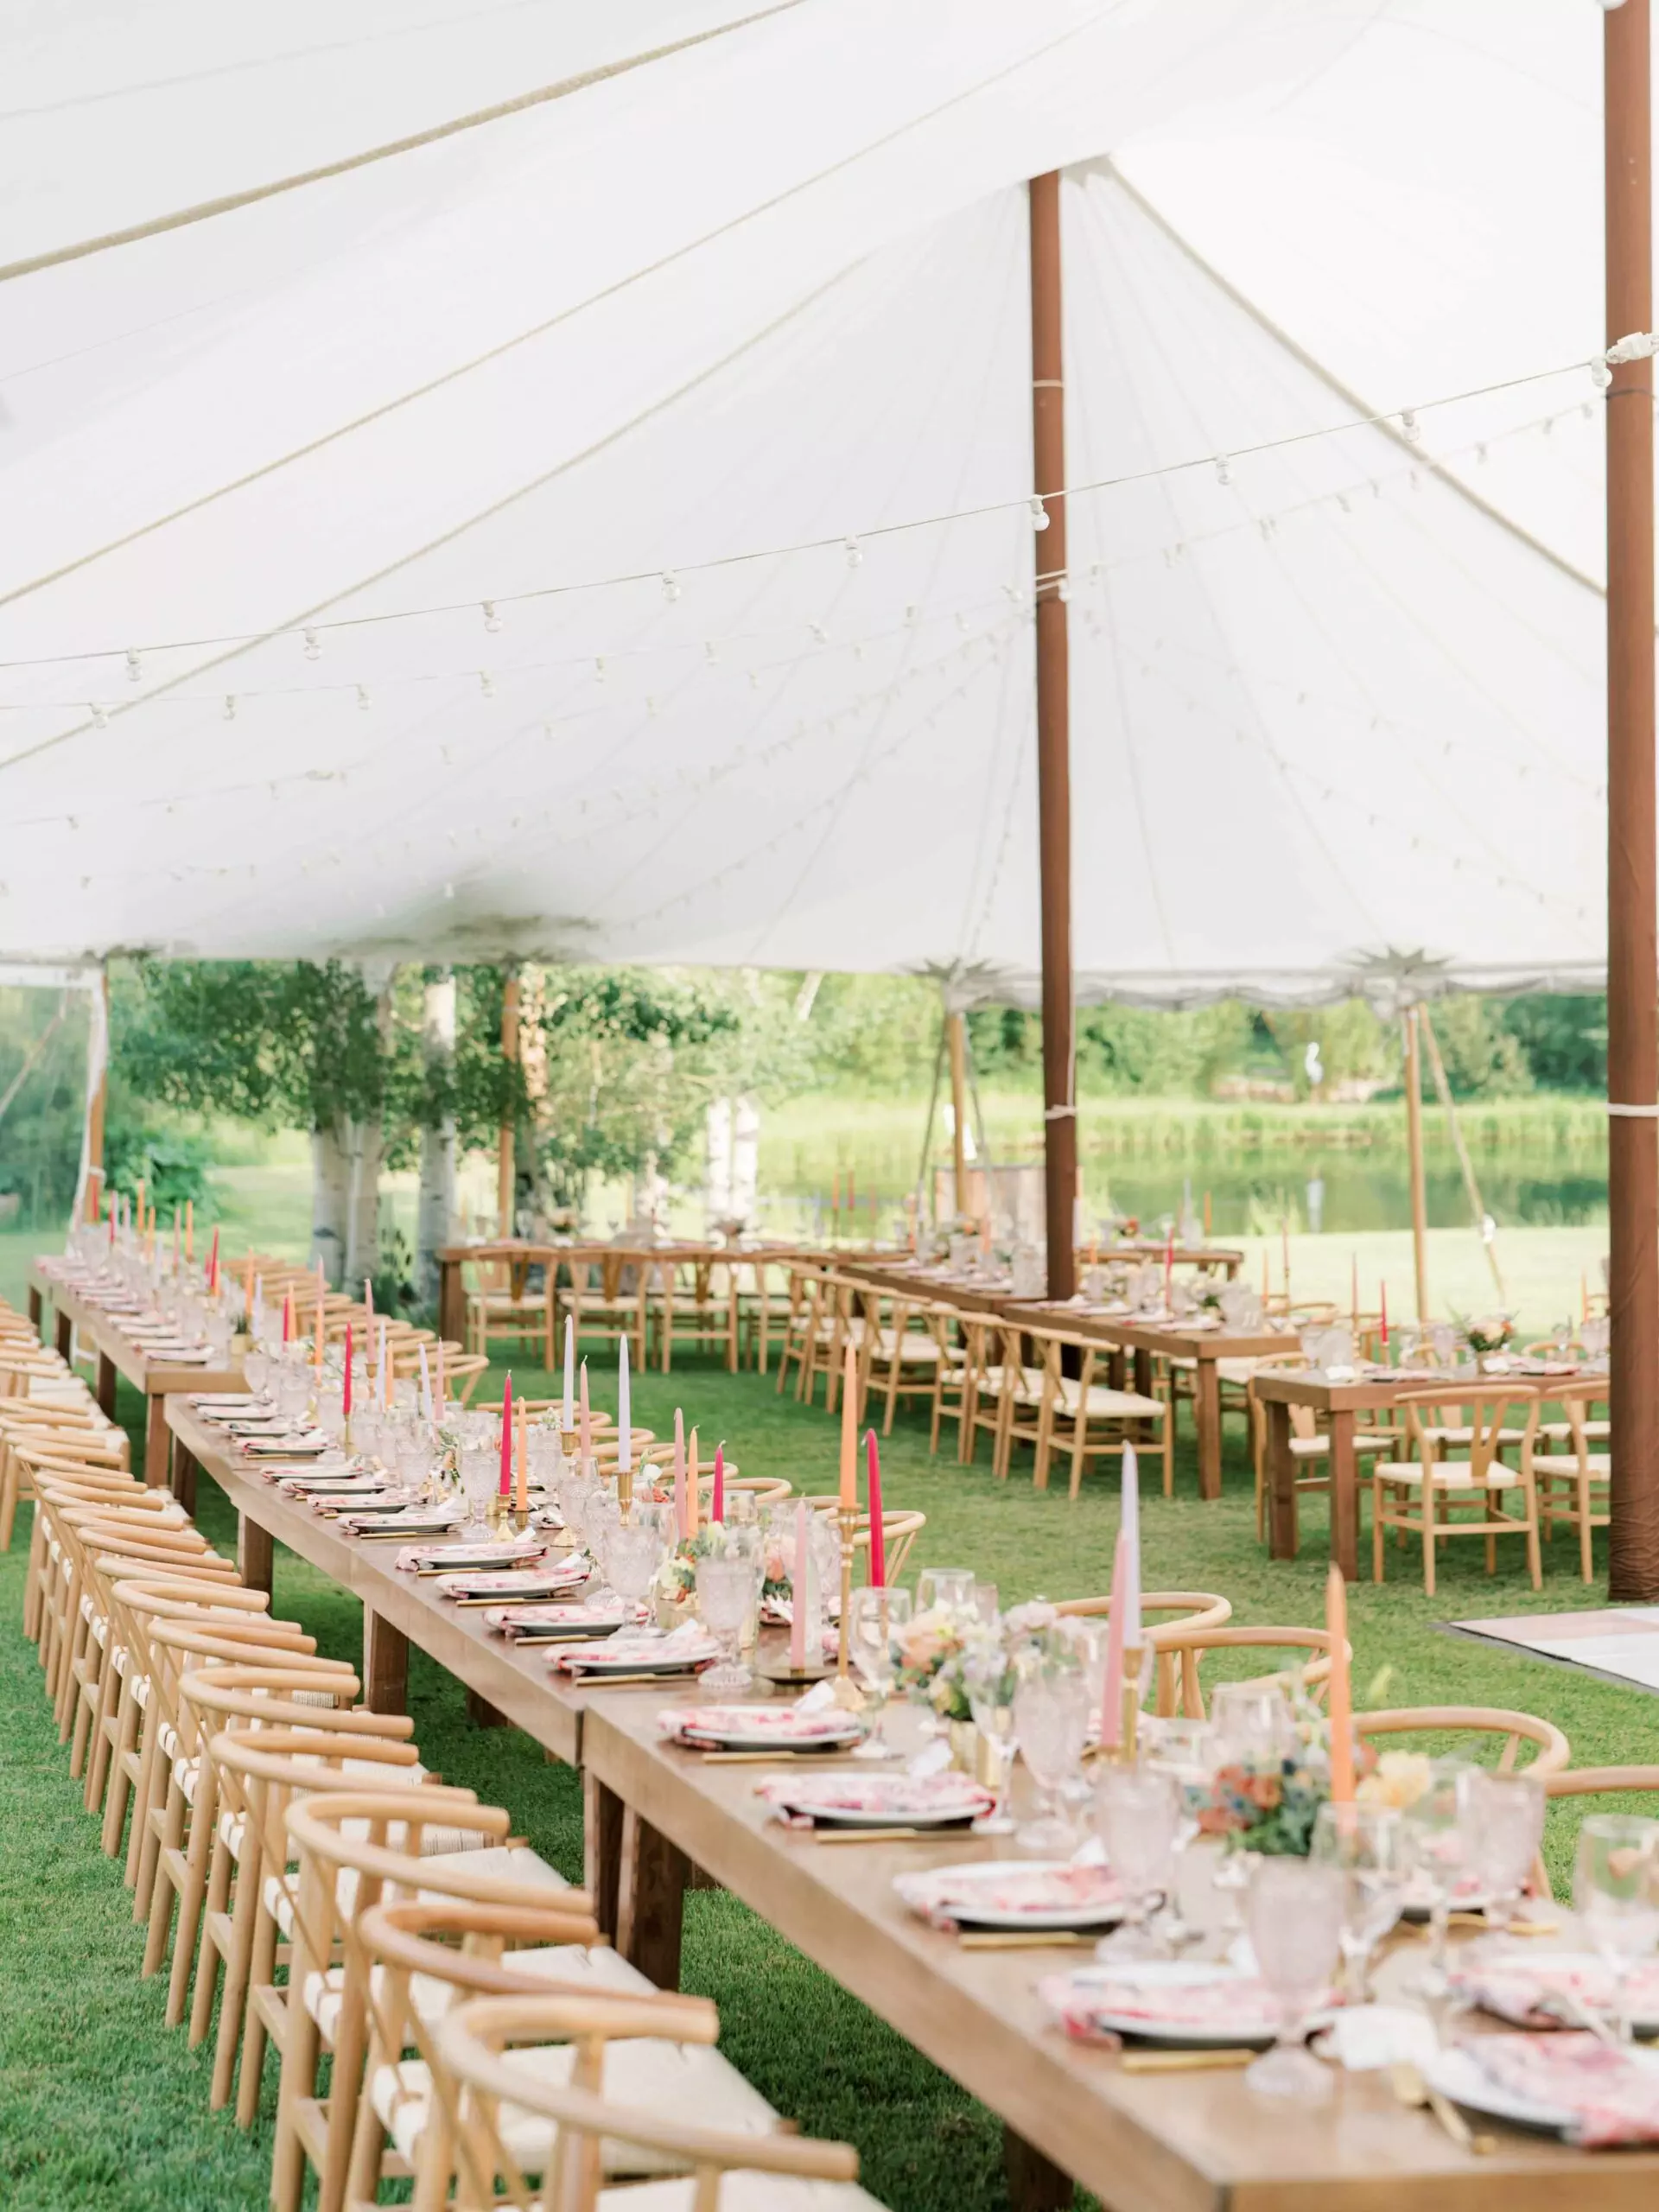 Wedding tent with wood farm tables